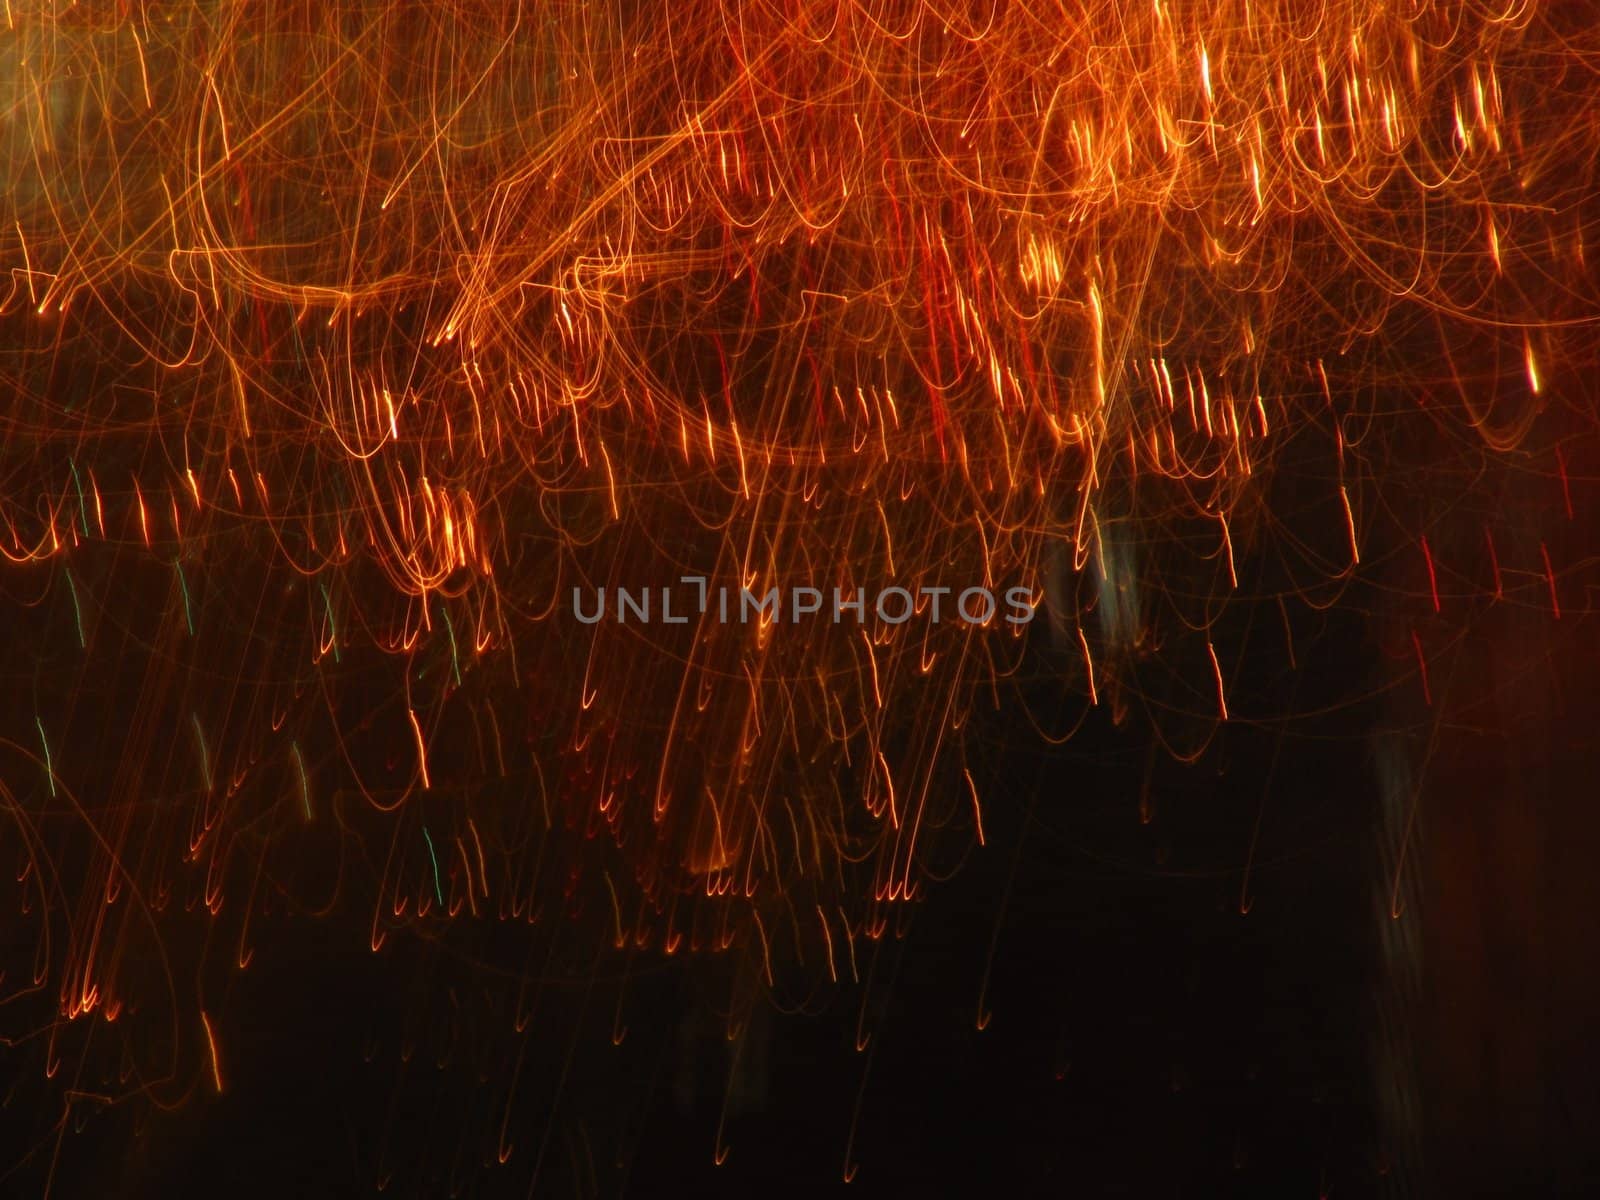 Abstract background created using light art (light painting)